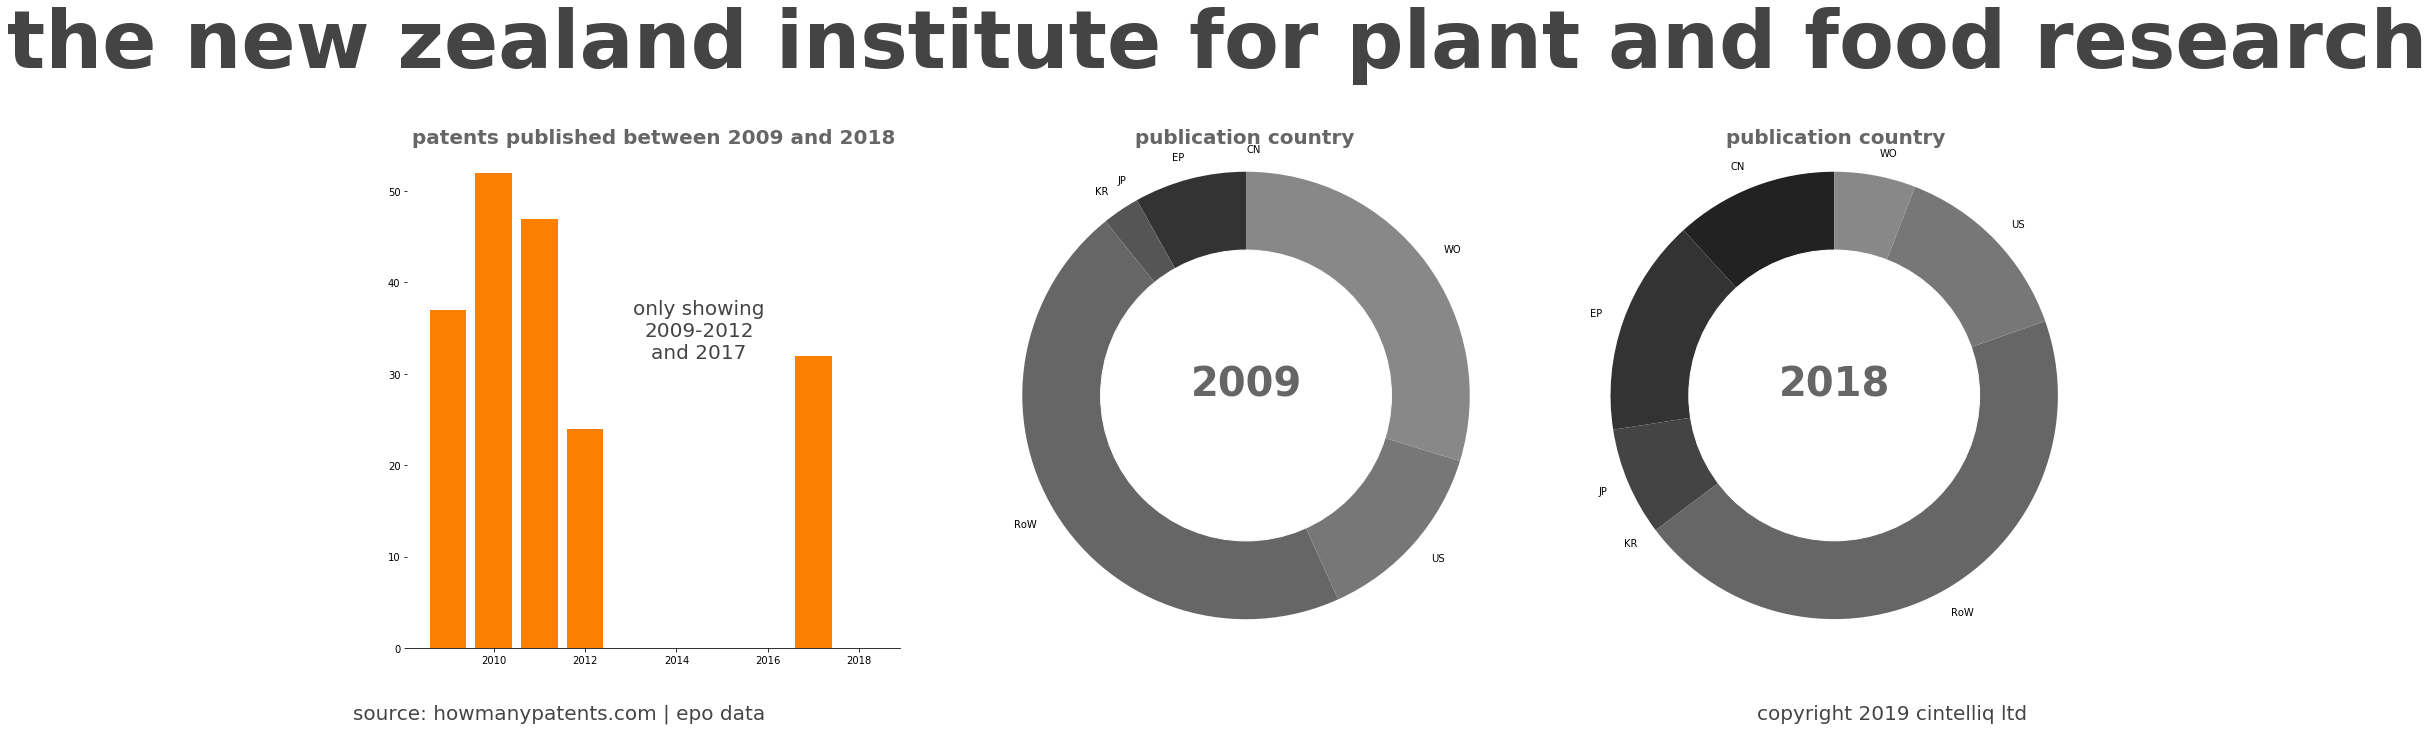 summary of patents for The New Zealand Institute For Plant And Food Research